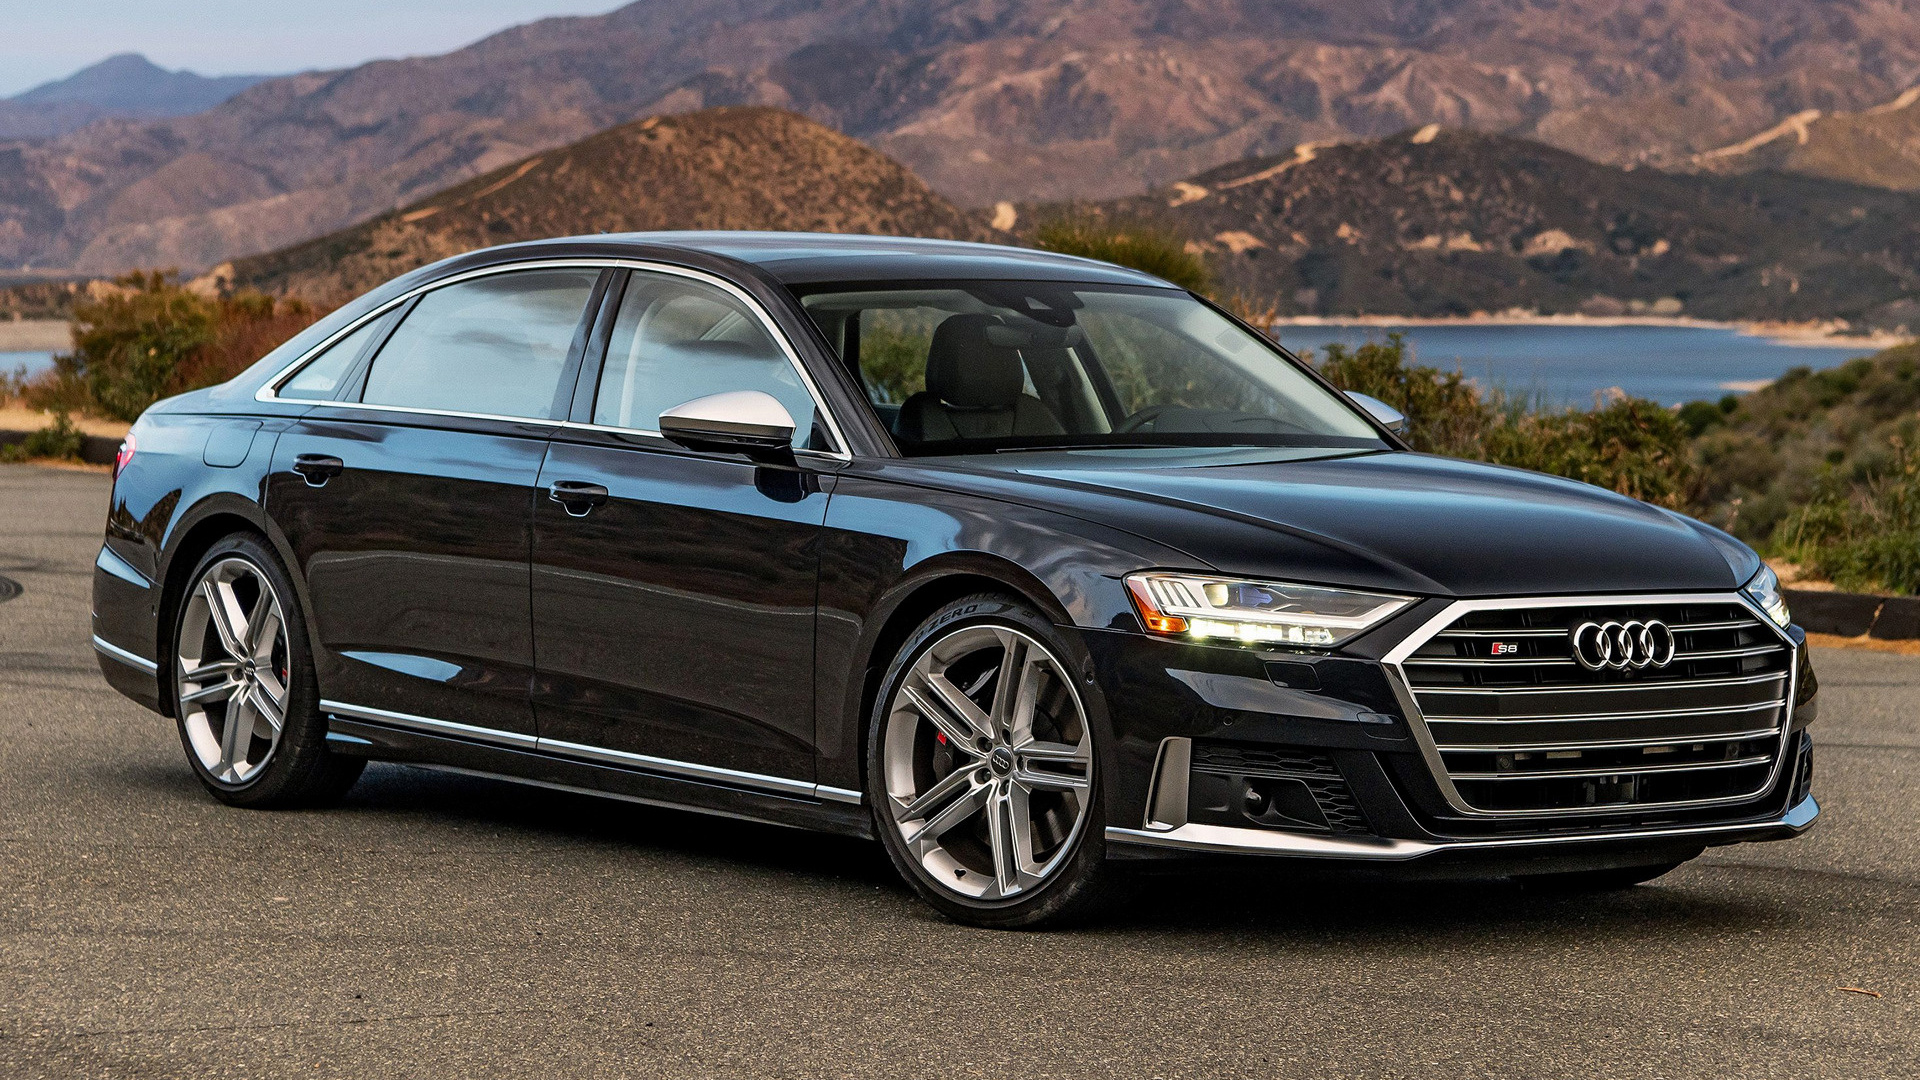 2020 Audi S8 (US) - Wallpapers and HD Images | Car Pixel